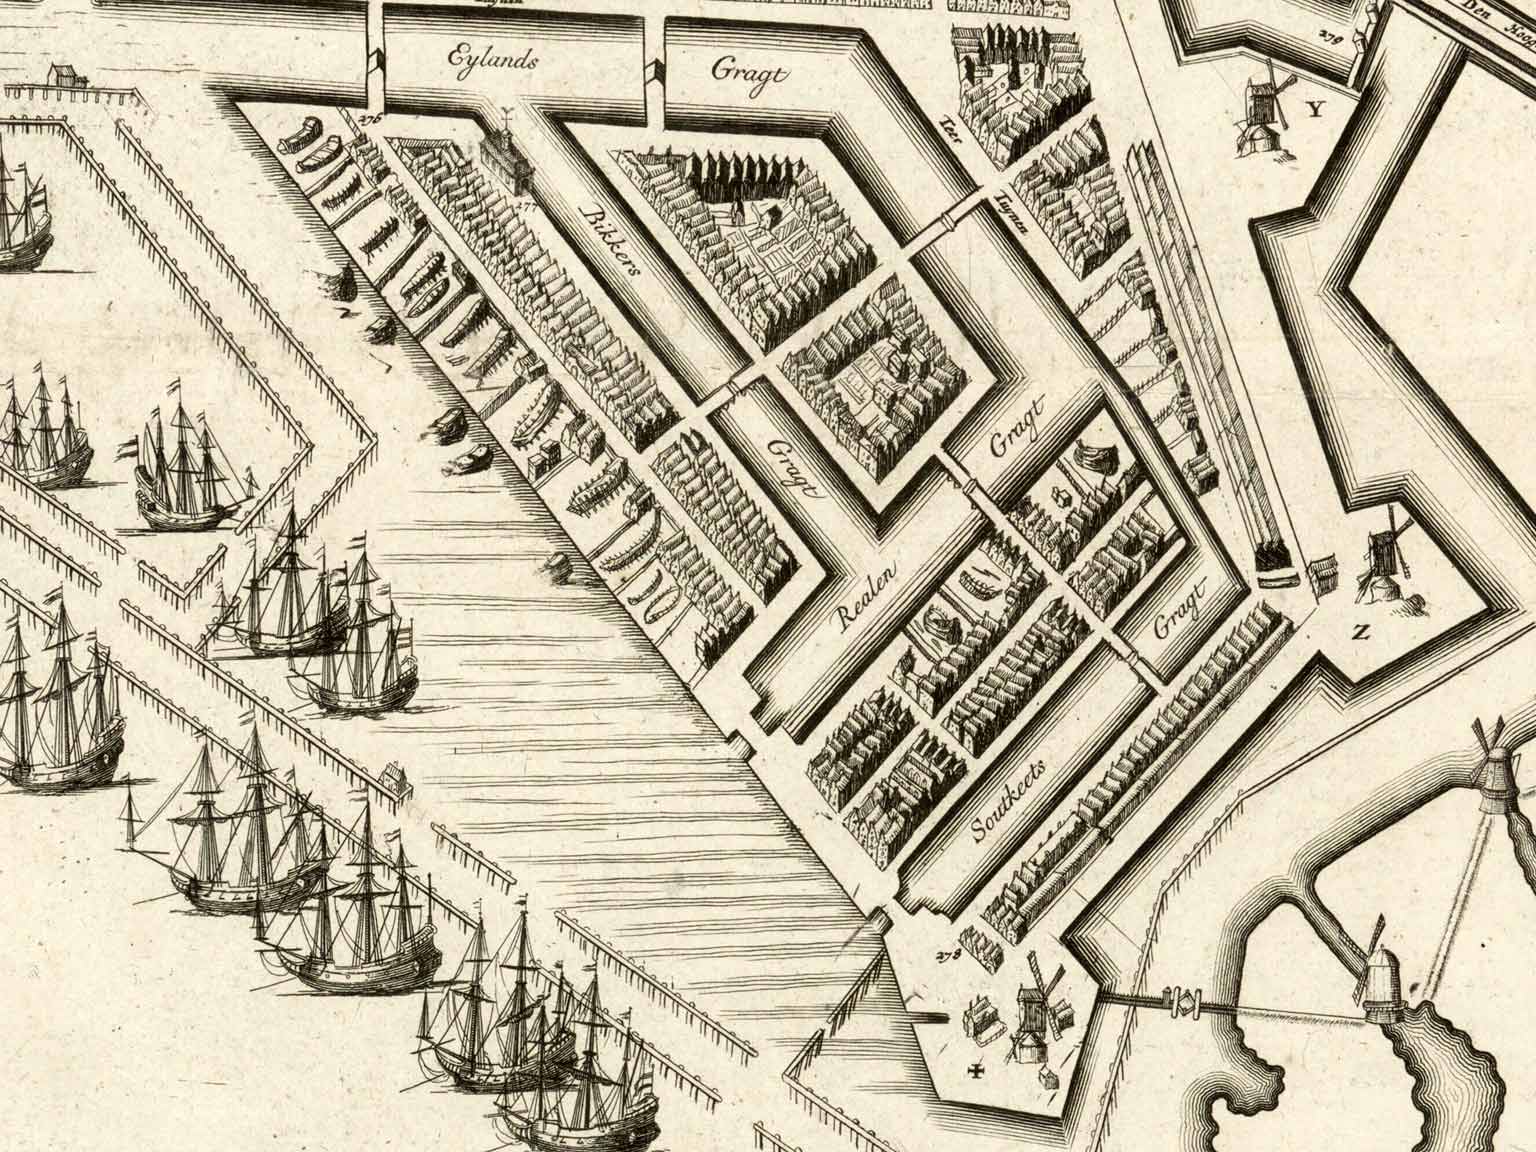 Detail of a map from around 1774-1779 of Western Islands, Amsterdam